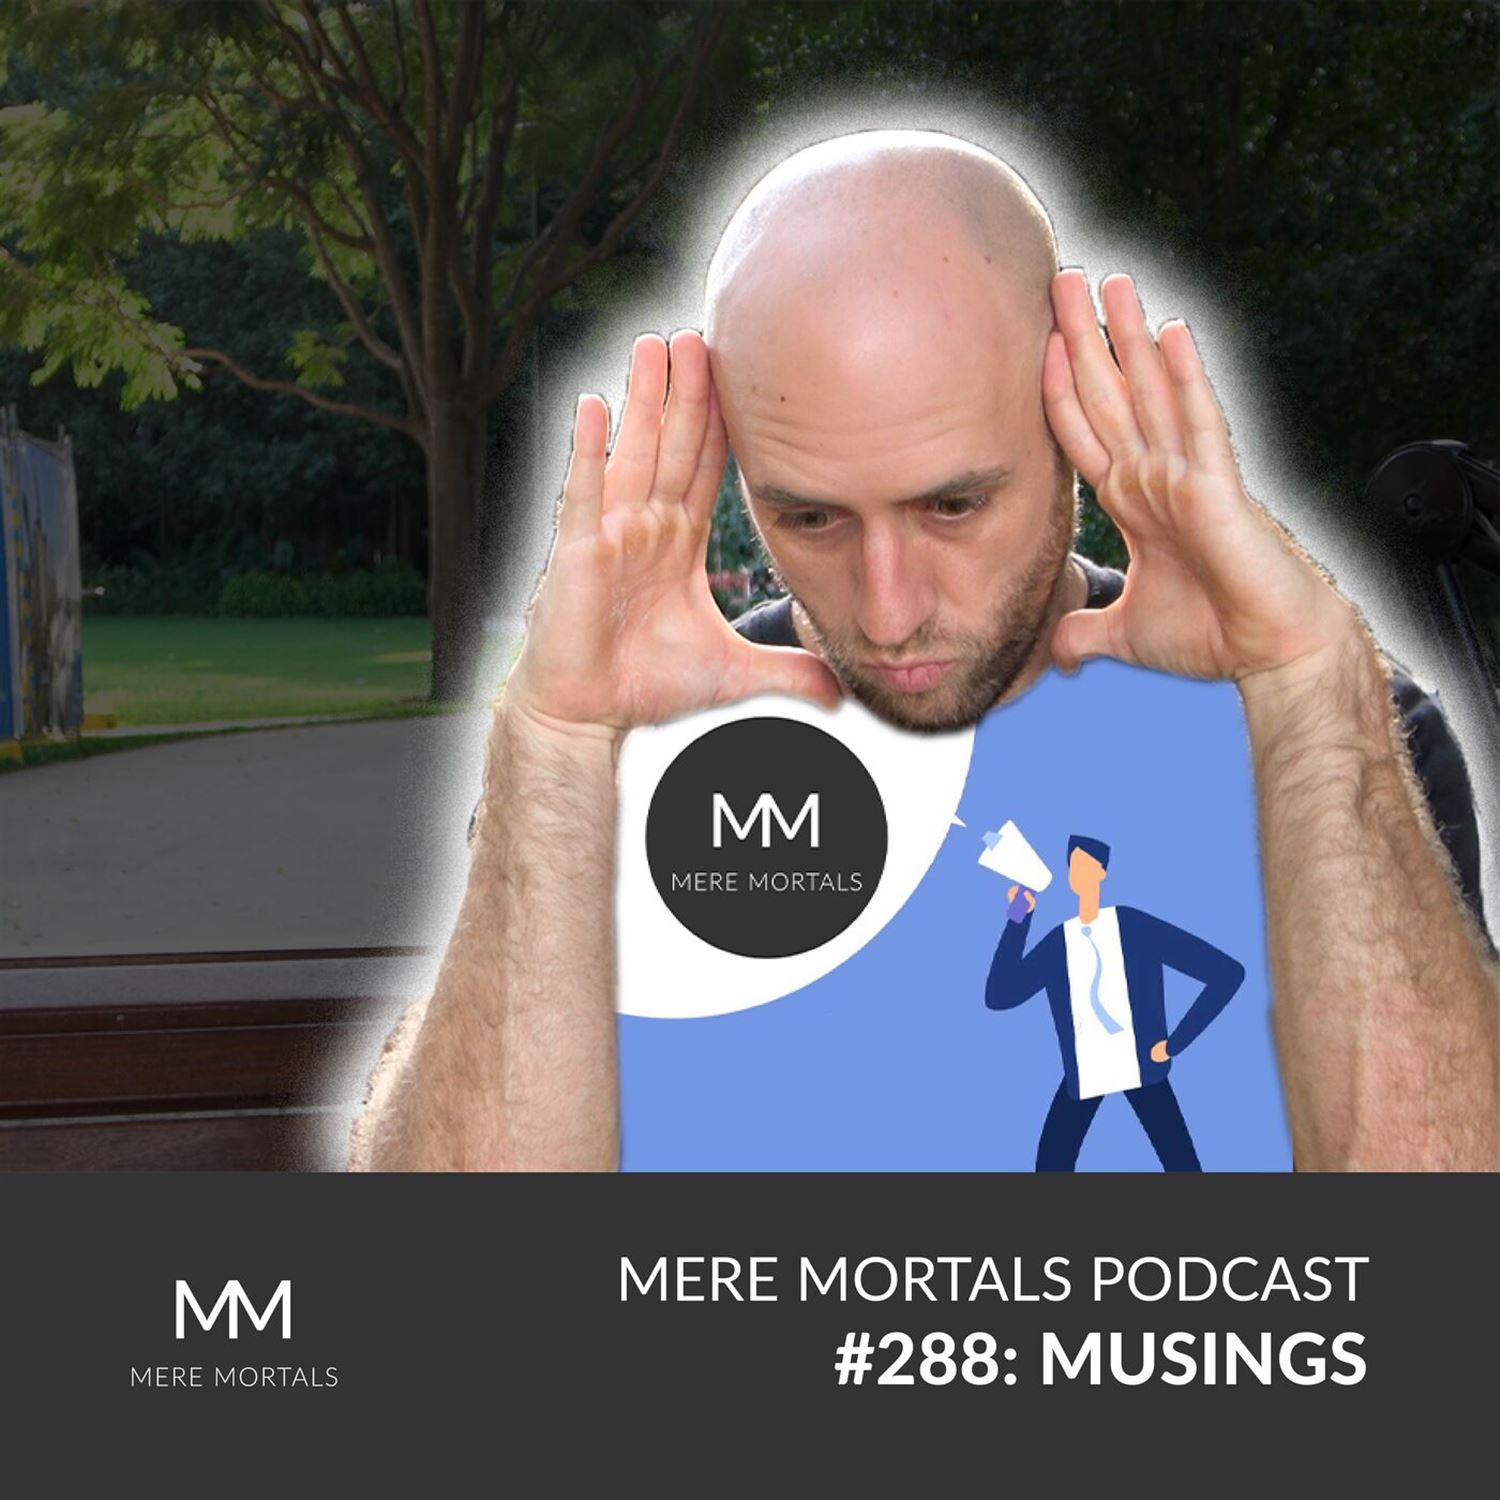 Mere Mortals Marketing: Some Ideas On How To Spread The Podcast